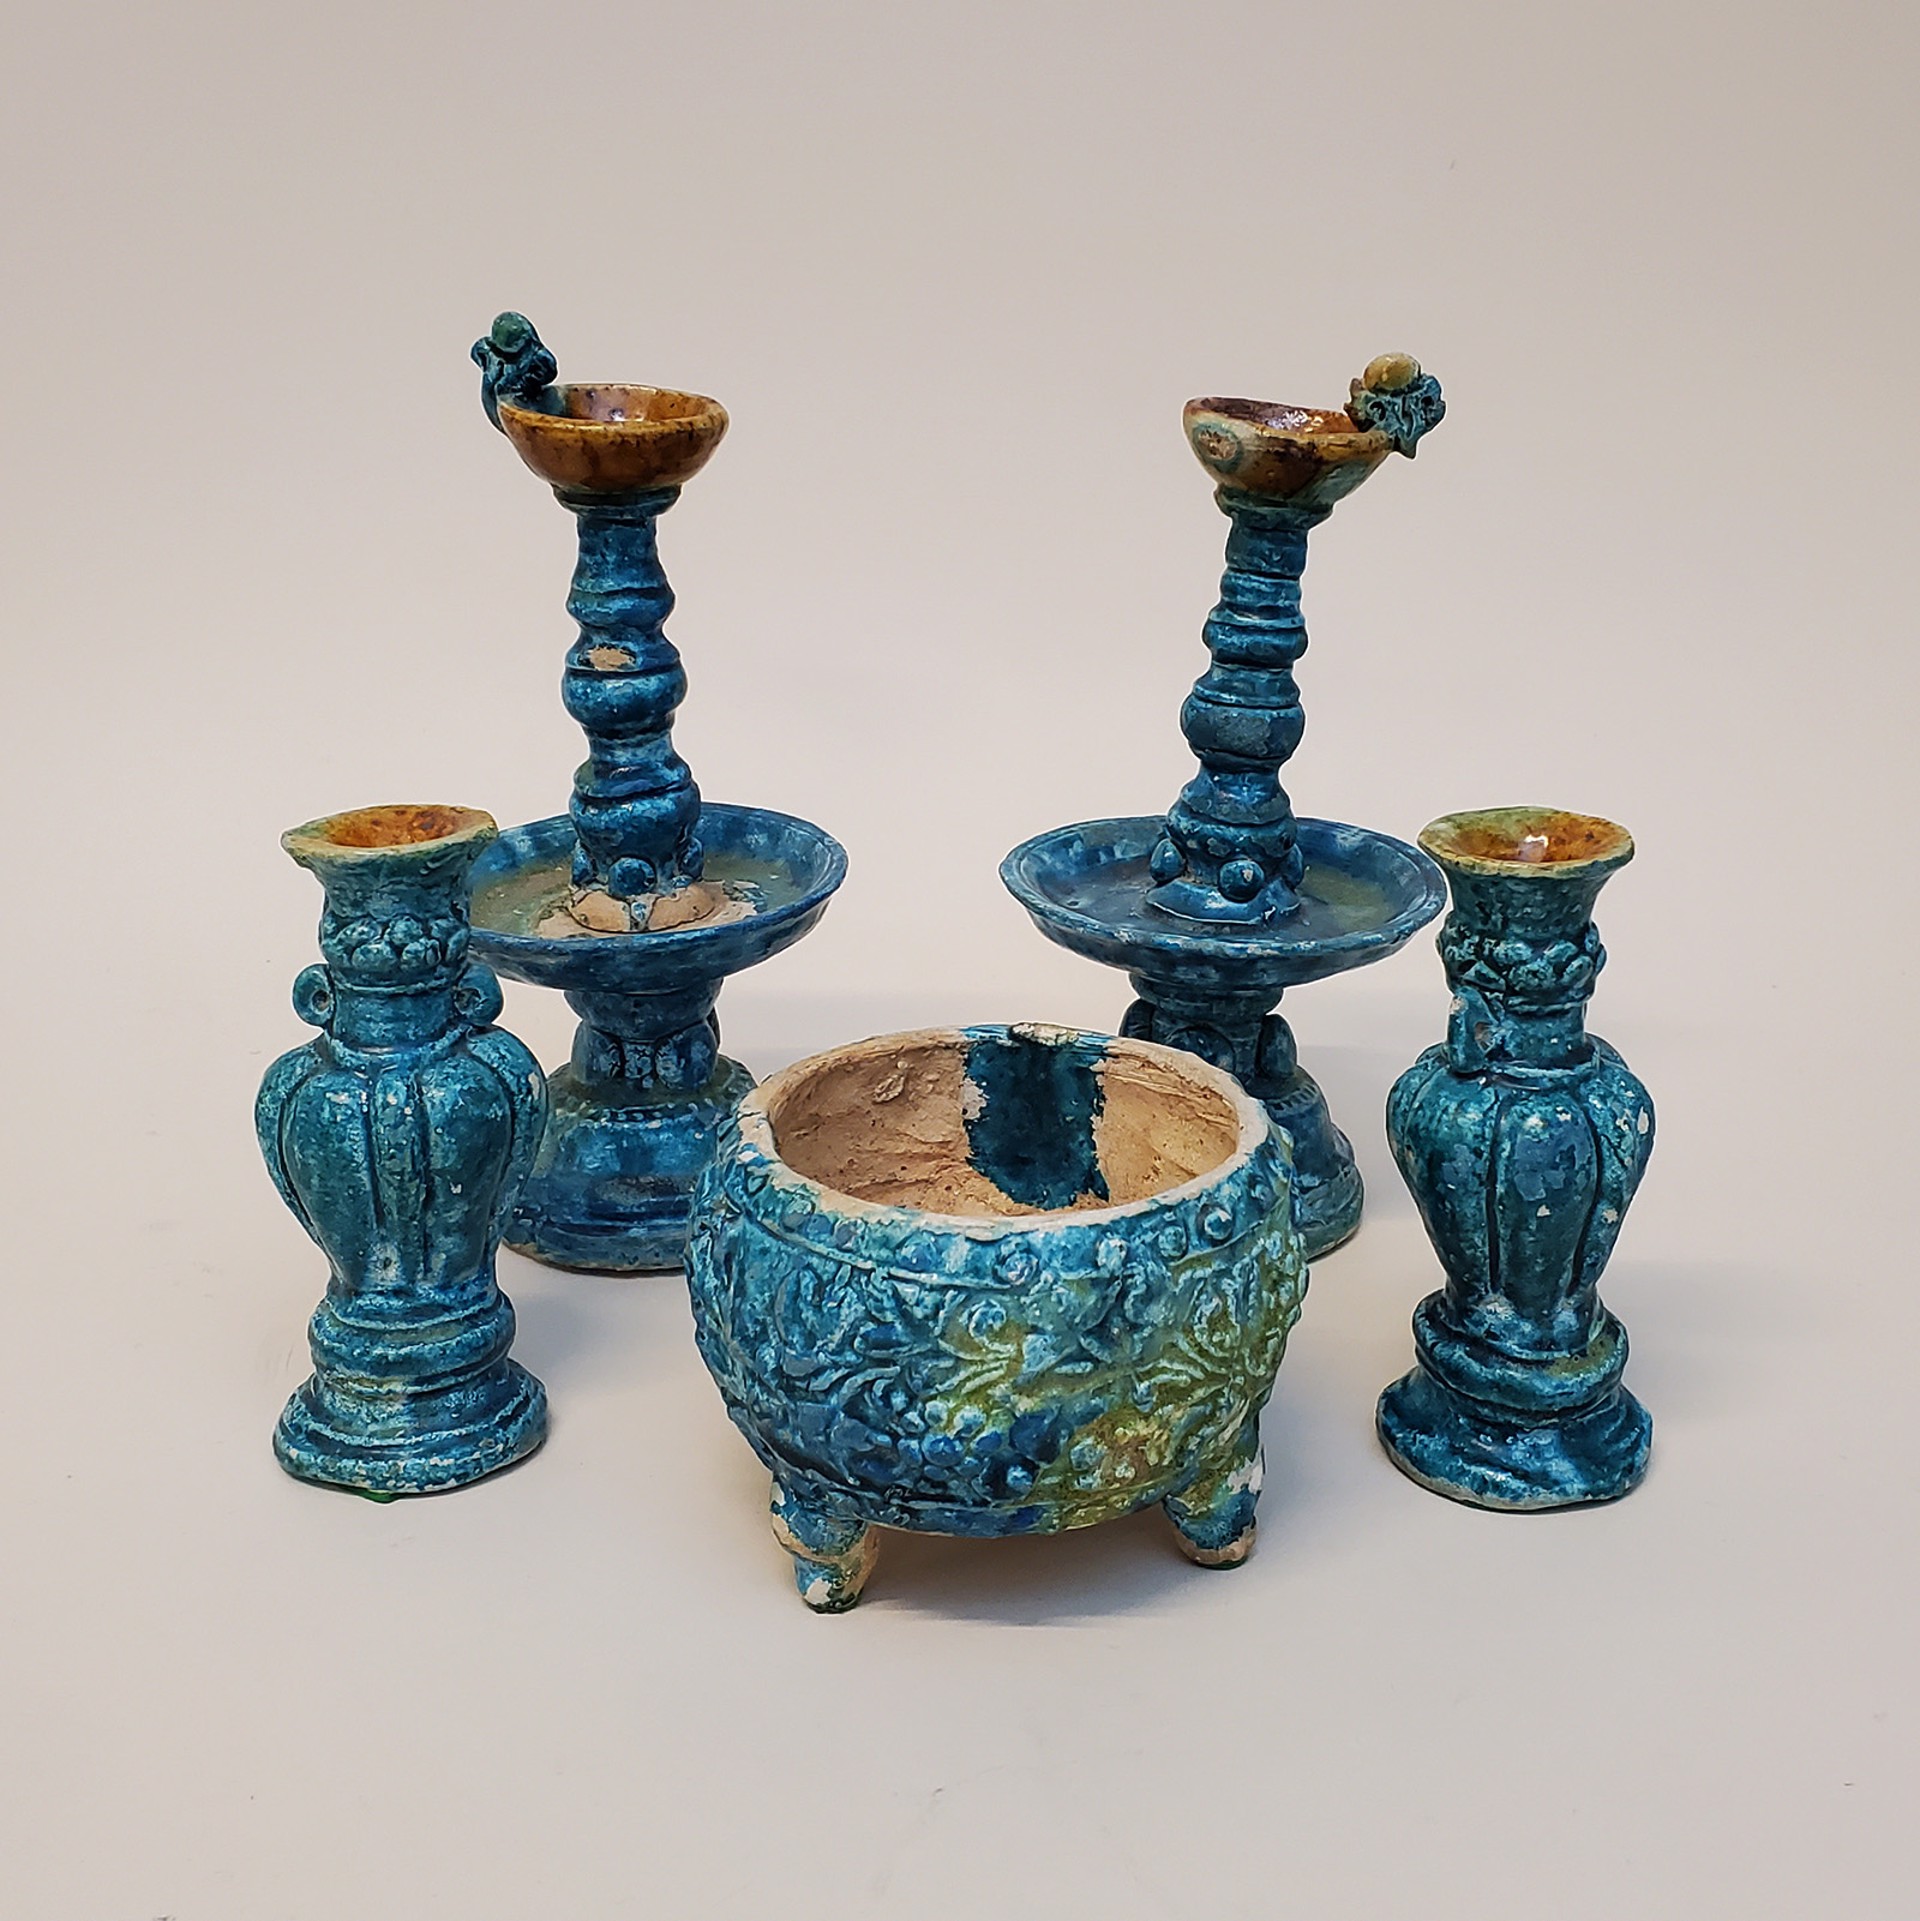 FIVE-PIECE TURQUOISE POTTERY TOMB SET